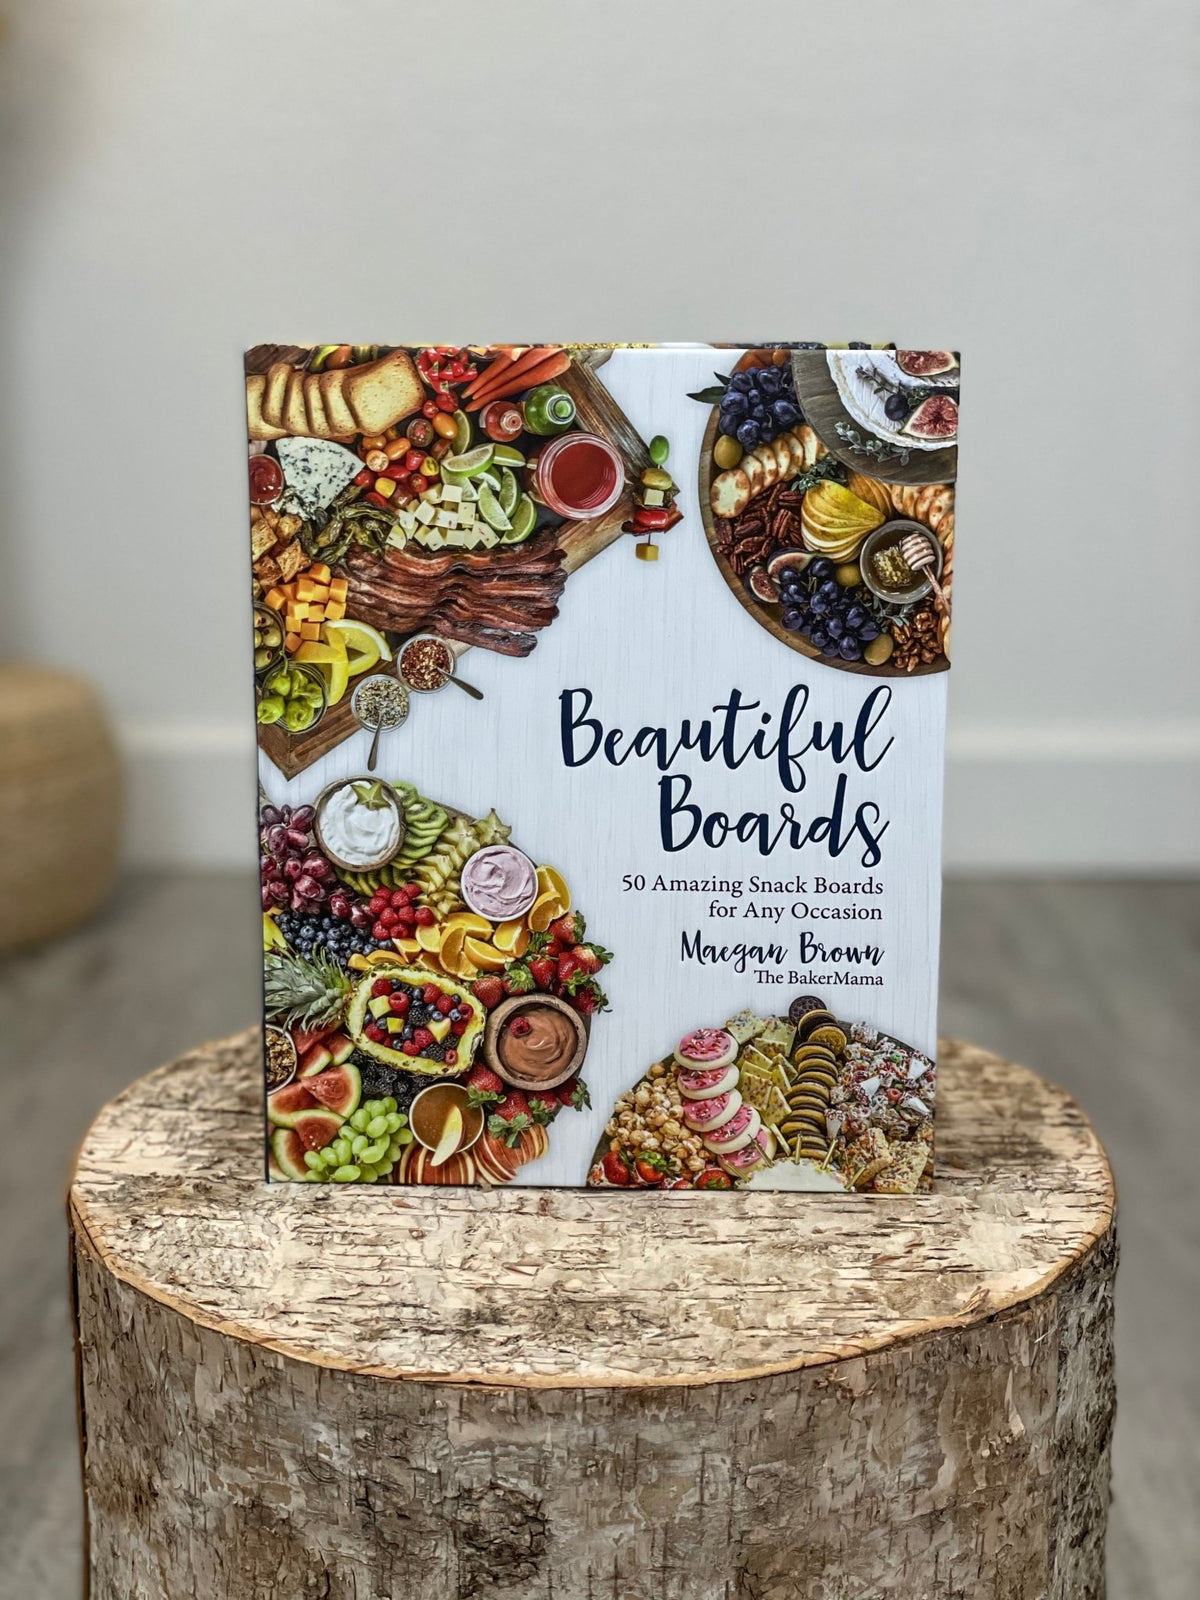 Beautiful Boards book - Trendy Gifts at Lush Fashion Lounge Boutique in Oklahoma City